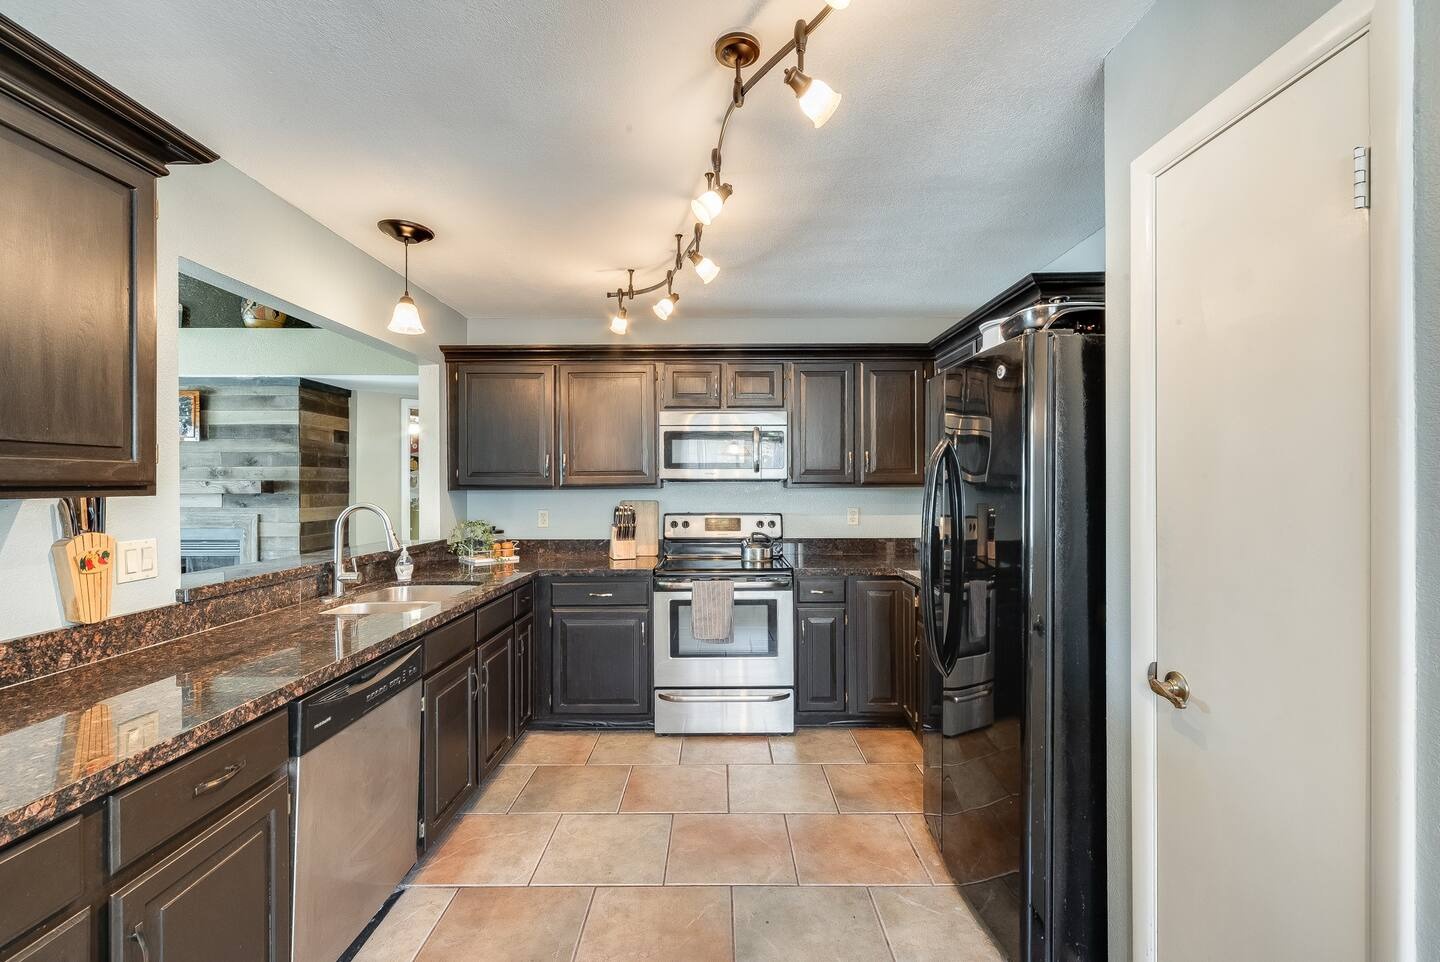 Glendale Vacation Rentals, Cahill Casa - The marble countertops beautifully adorn this kitchen which contains stainless steel appliances and a breakfast table fit for 2.